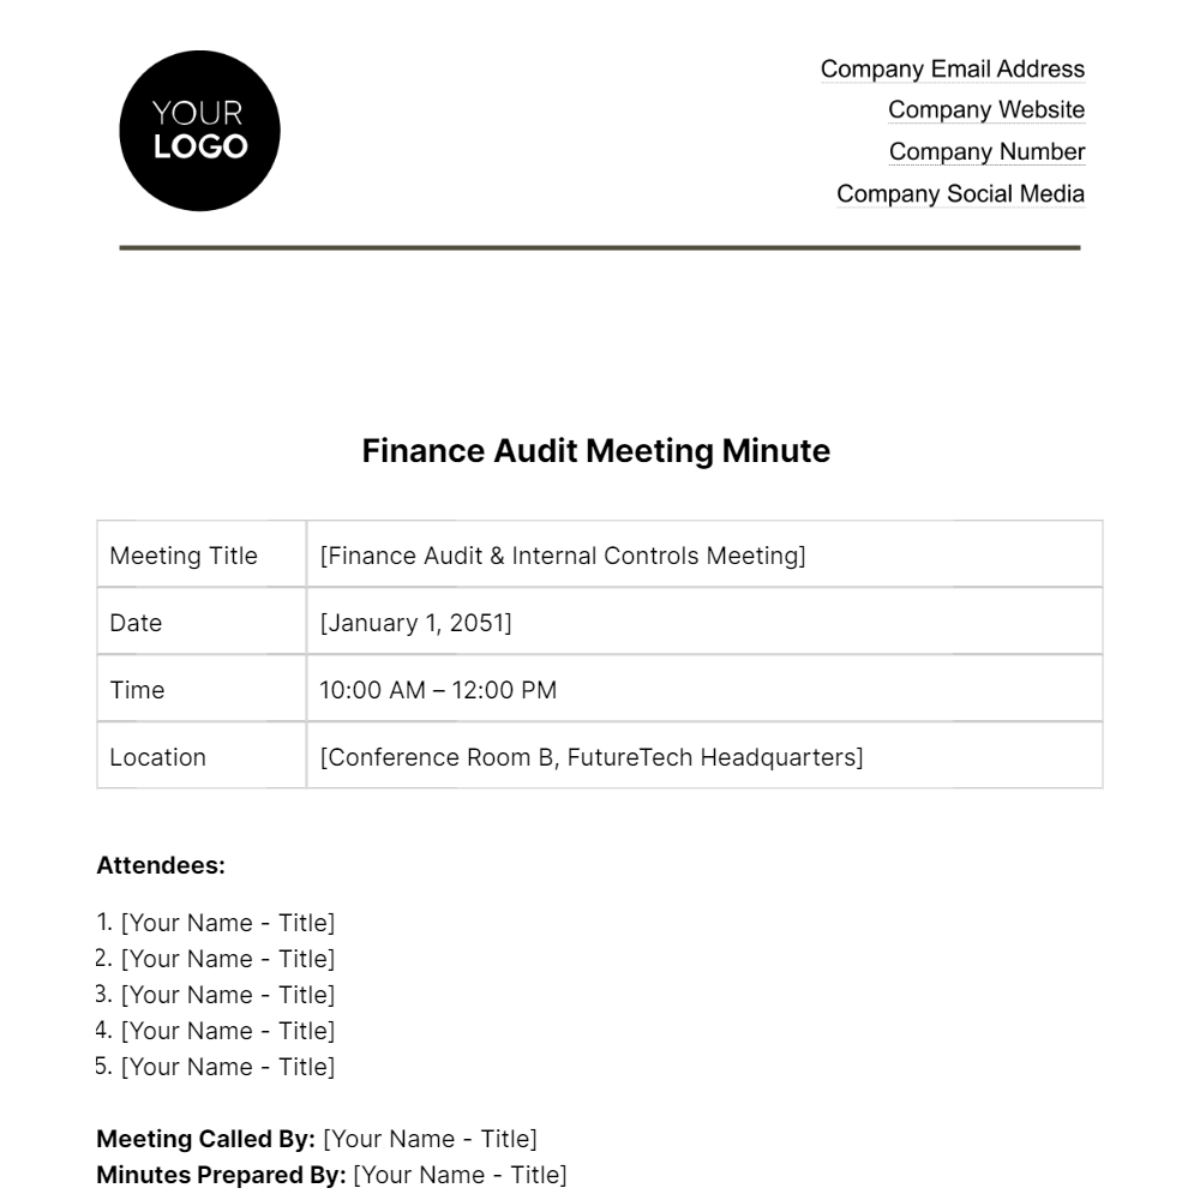 Free Finance Audit Meeting Minute Template